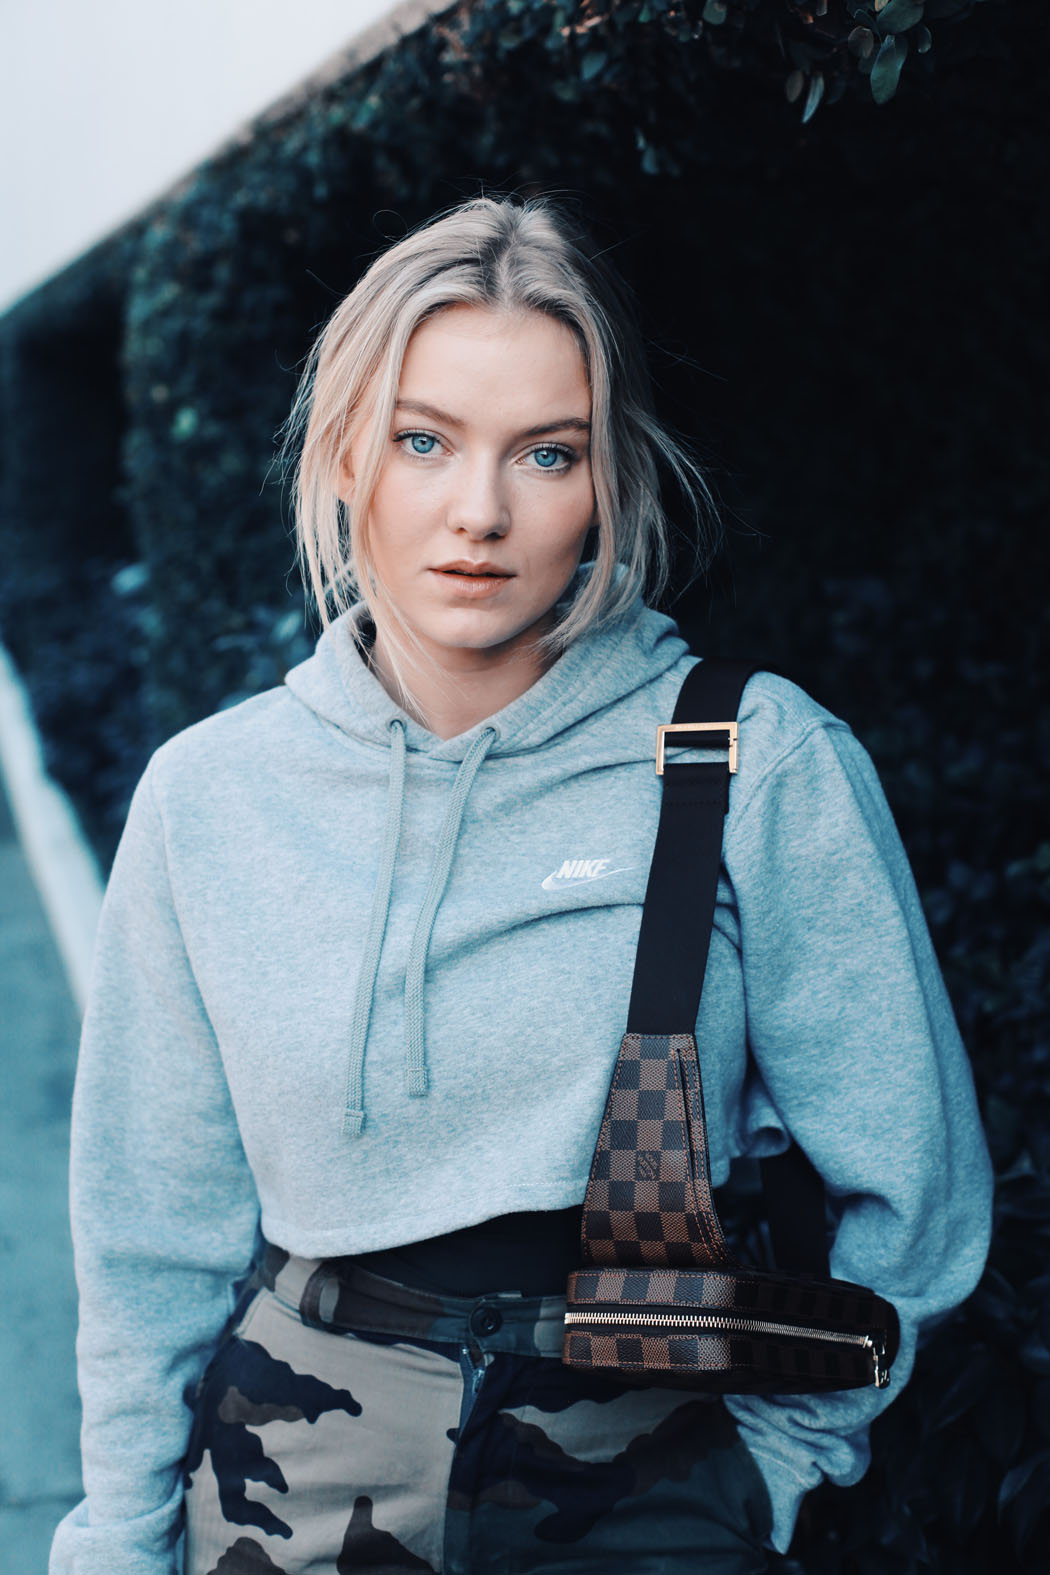 Astrid S is one of the biggest singers out of Norway right now. 